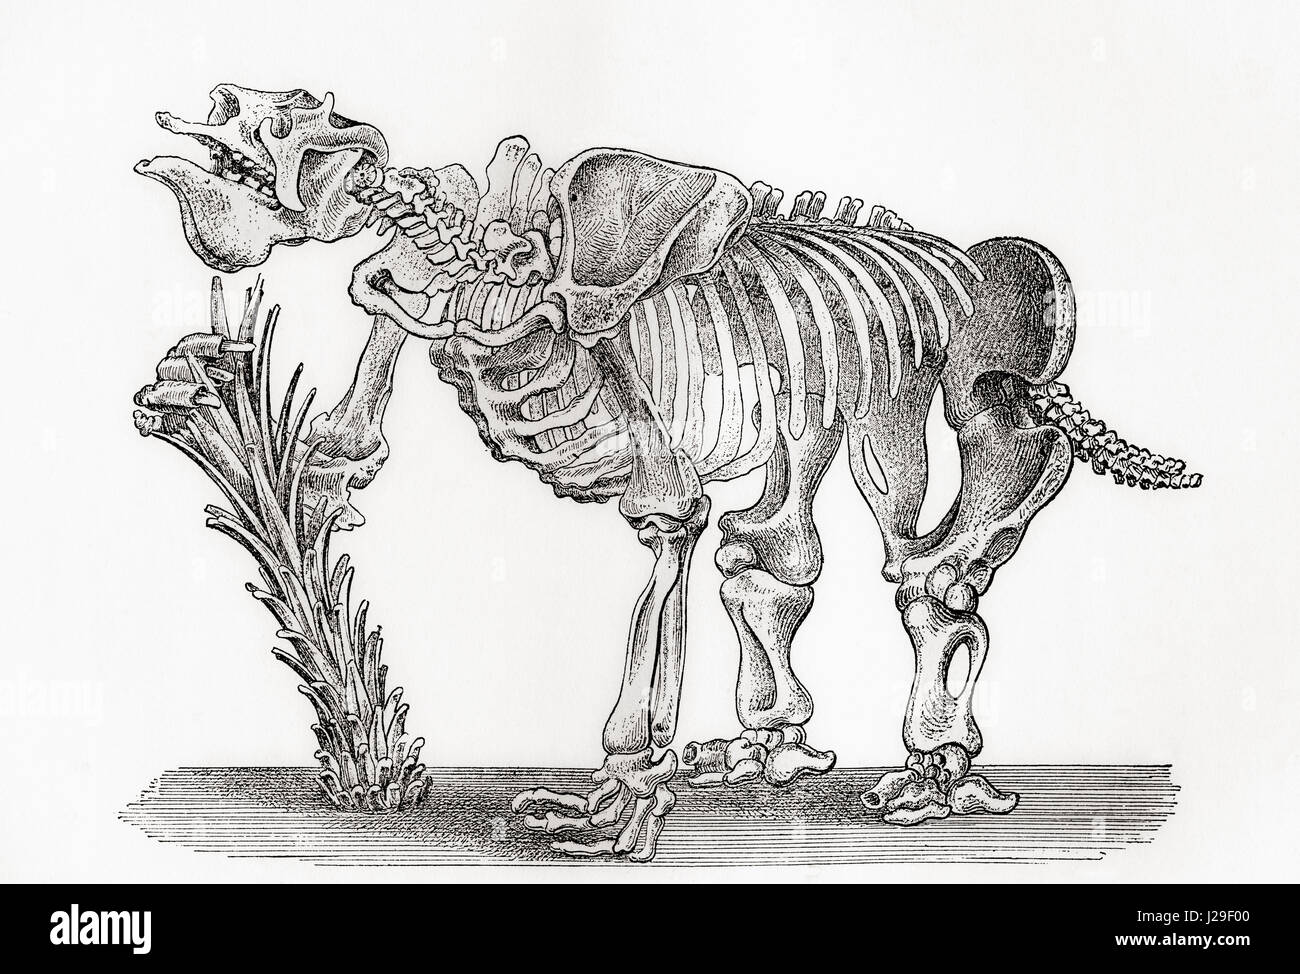 Skeleton of a Megatharium.  From The World's Foundations or Geology for Beginners, published 1883. Stock Photo